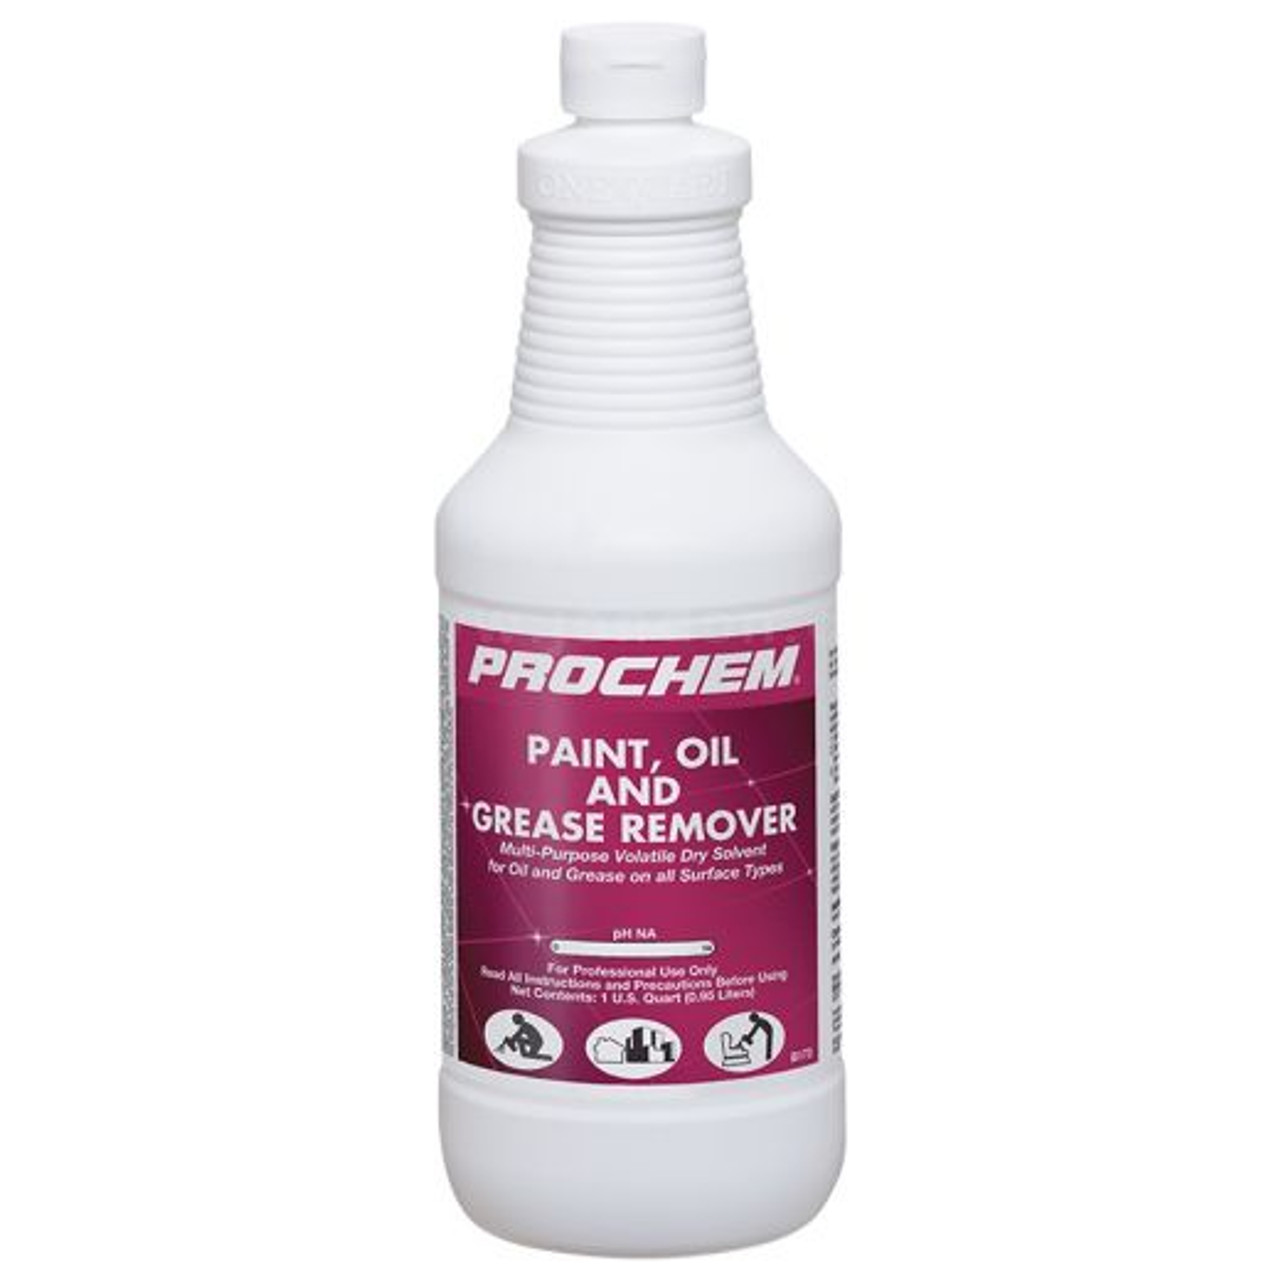 Prochem Paint Oil and Grease Remover - 1pt